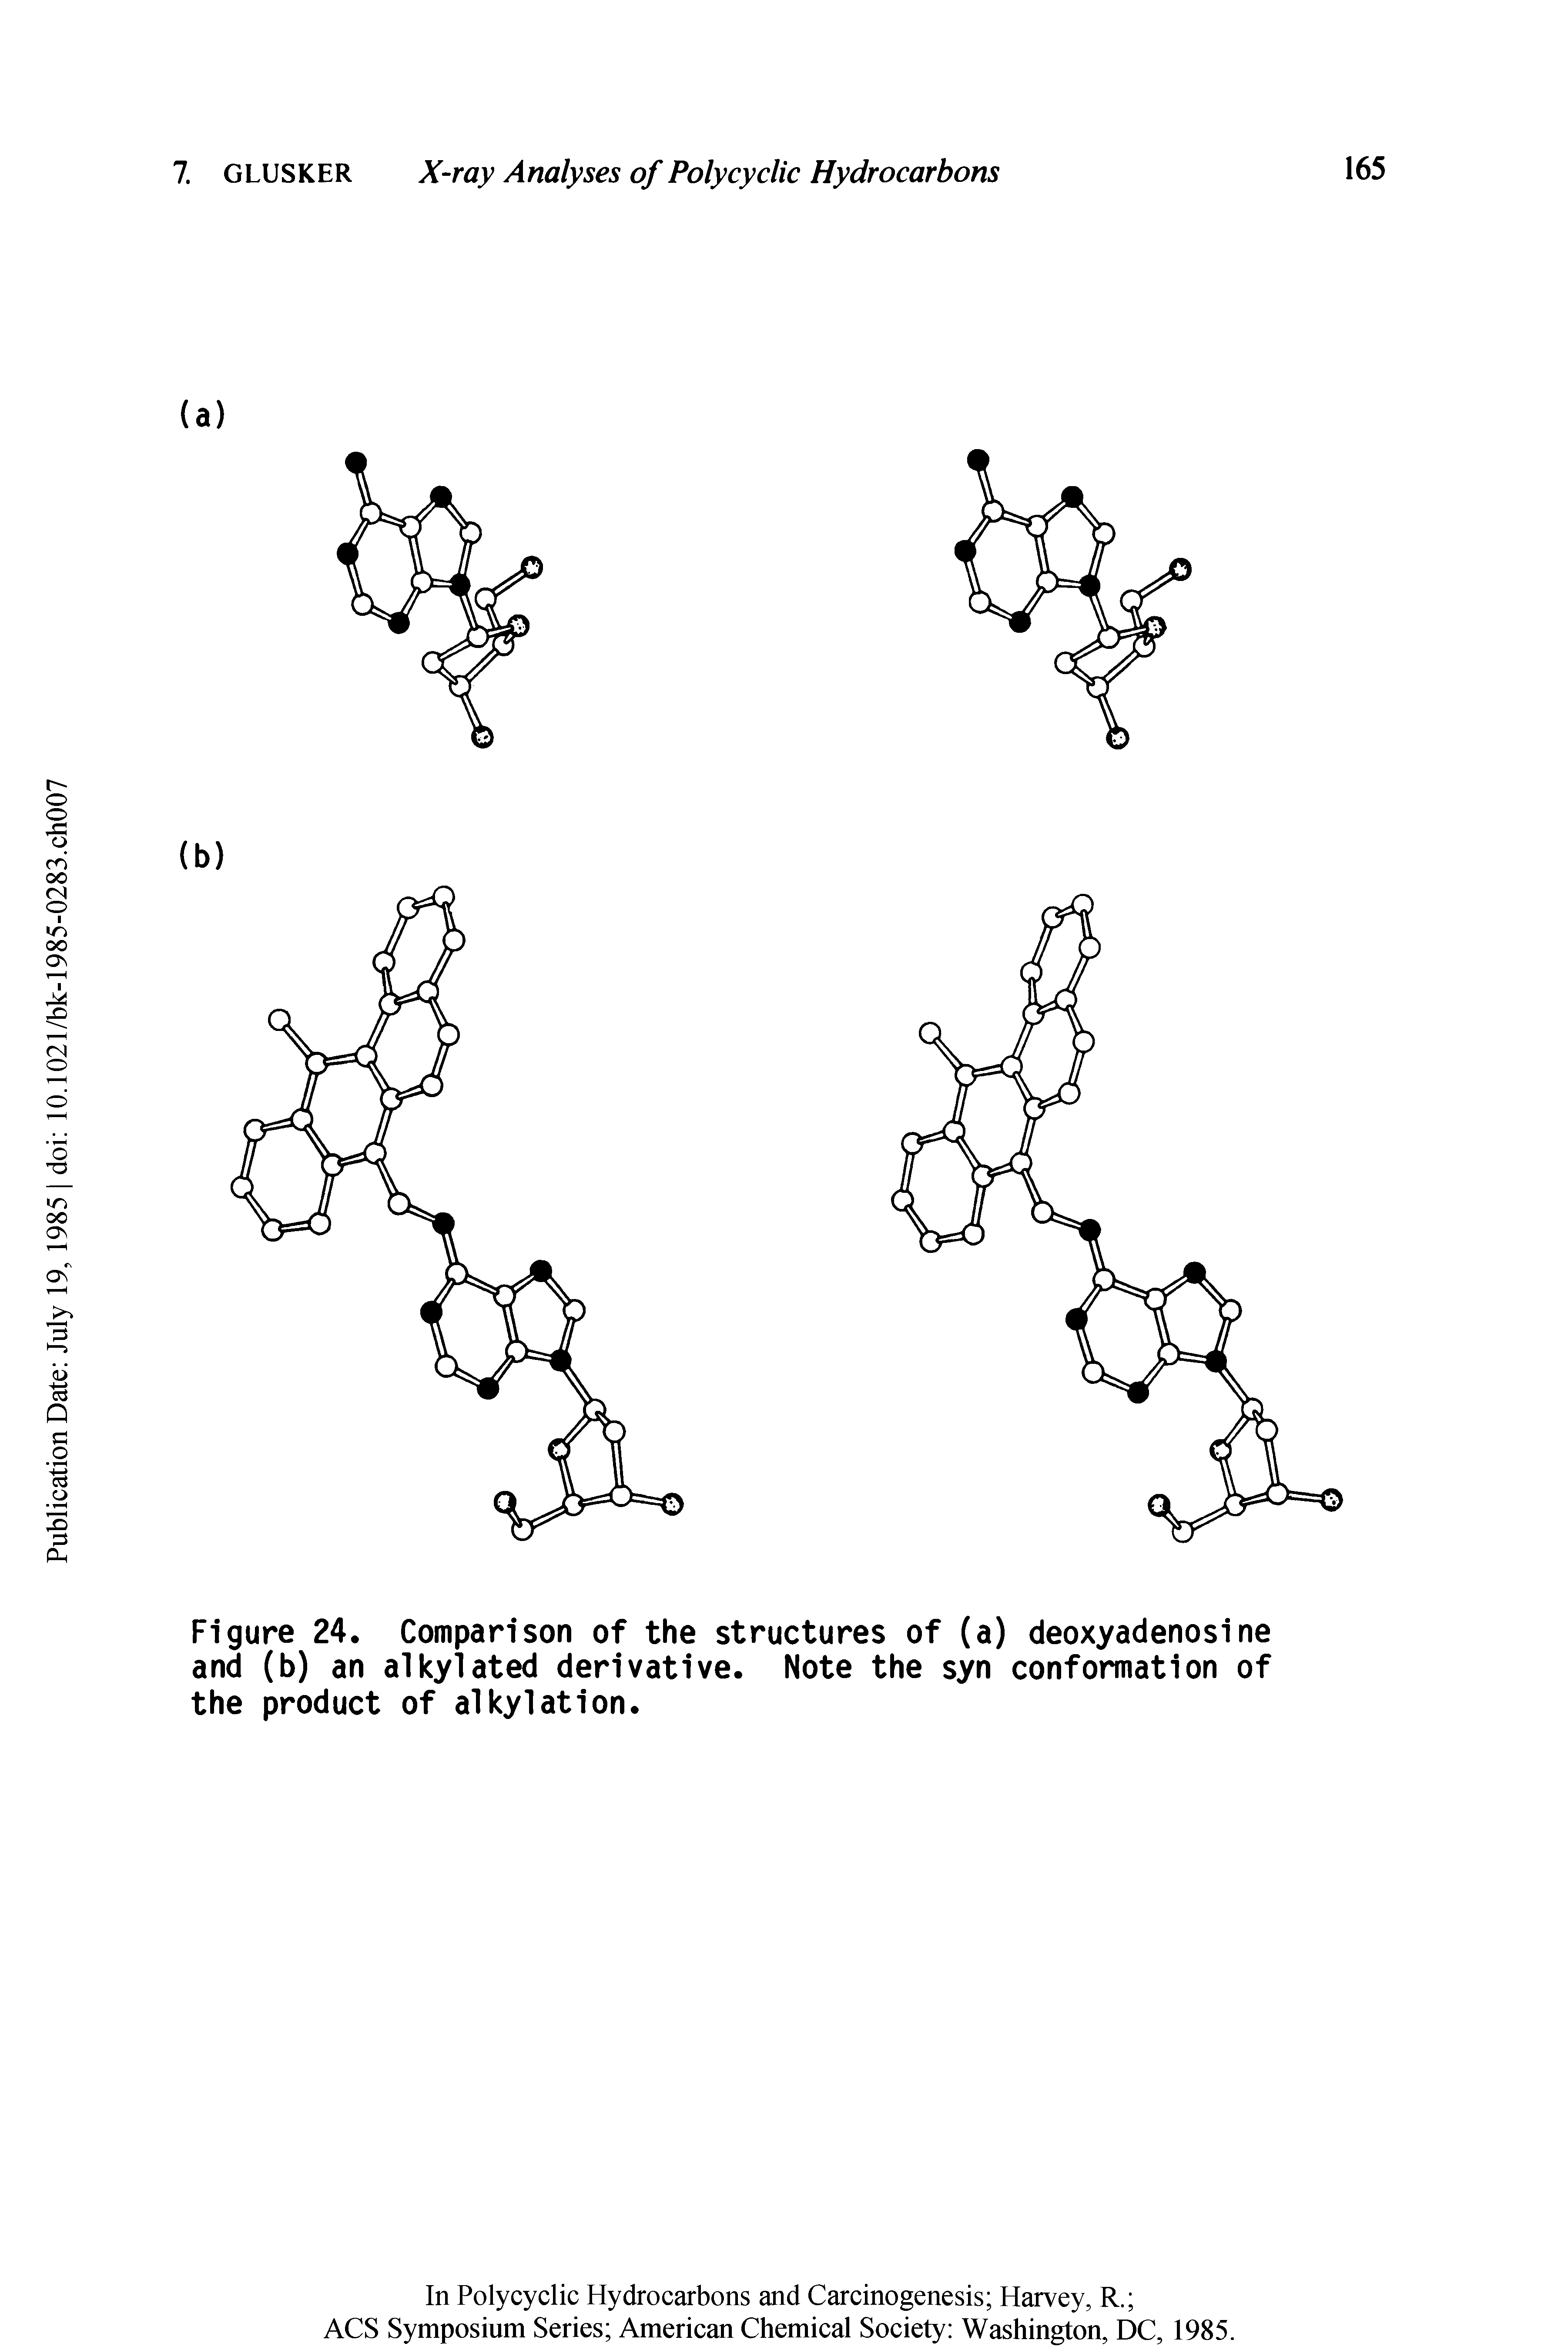 Figure 24. Comparison of the structures of (a) deoxyadenosine and (b) an alkylated derivative. Note the syn conformation of the product of alkylation.